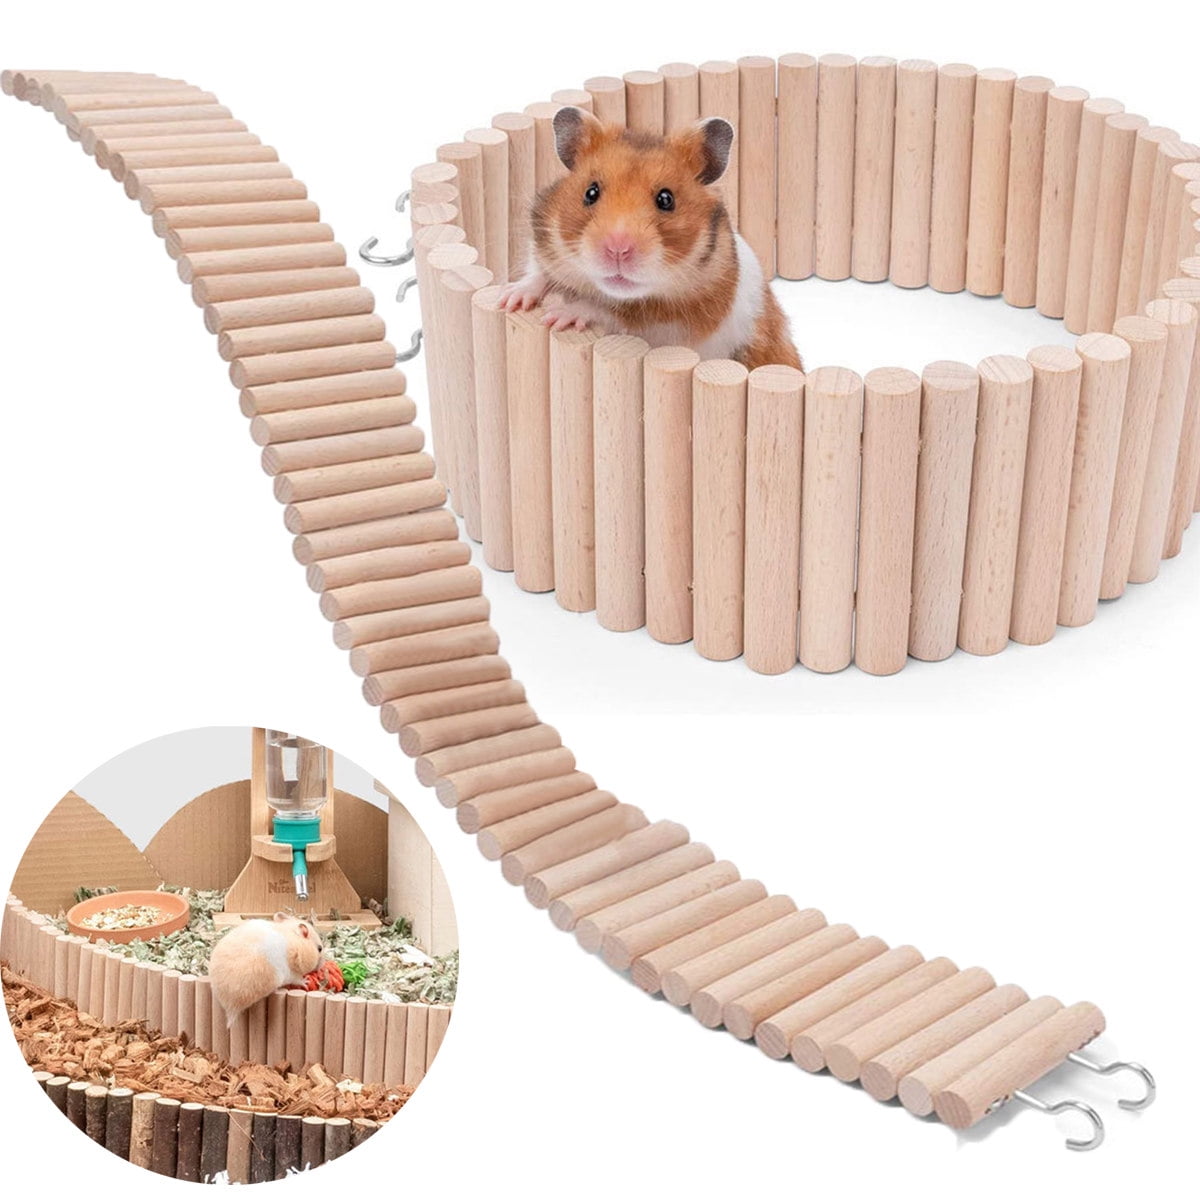 Dwarf Hamster Cage Accessories Suitable for Syrian Hamster and Other Small Animal Hamster Toys Set 5 Pack Wooden Gerbil Hideout Rainbow Bridge Pet Exercise Toys Set and Seesaw Swing 